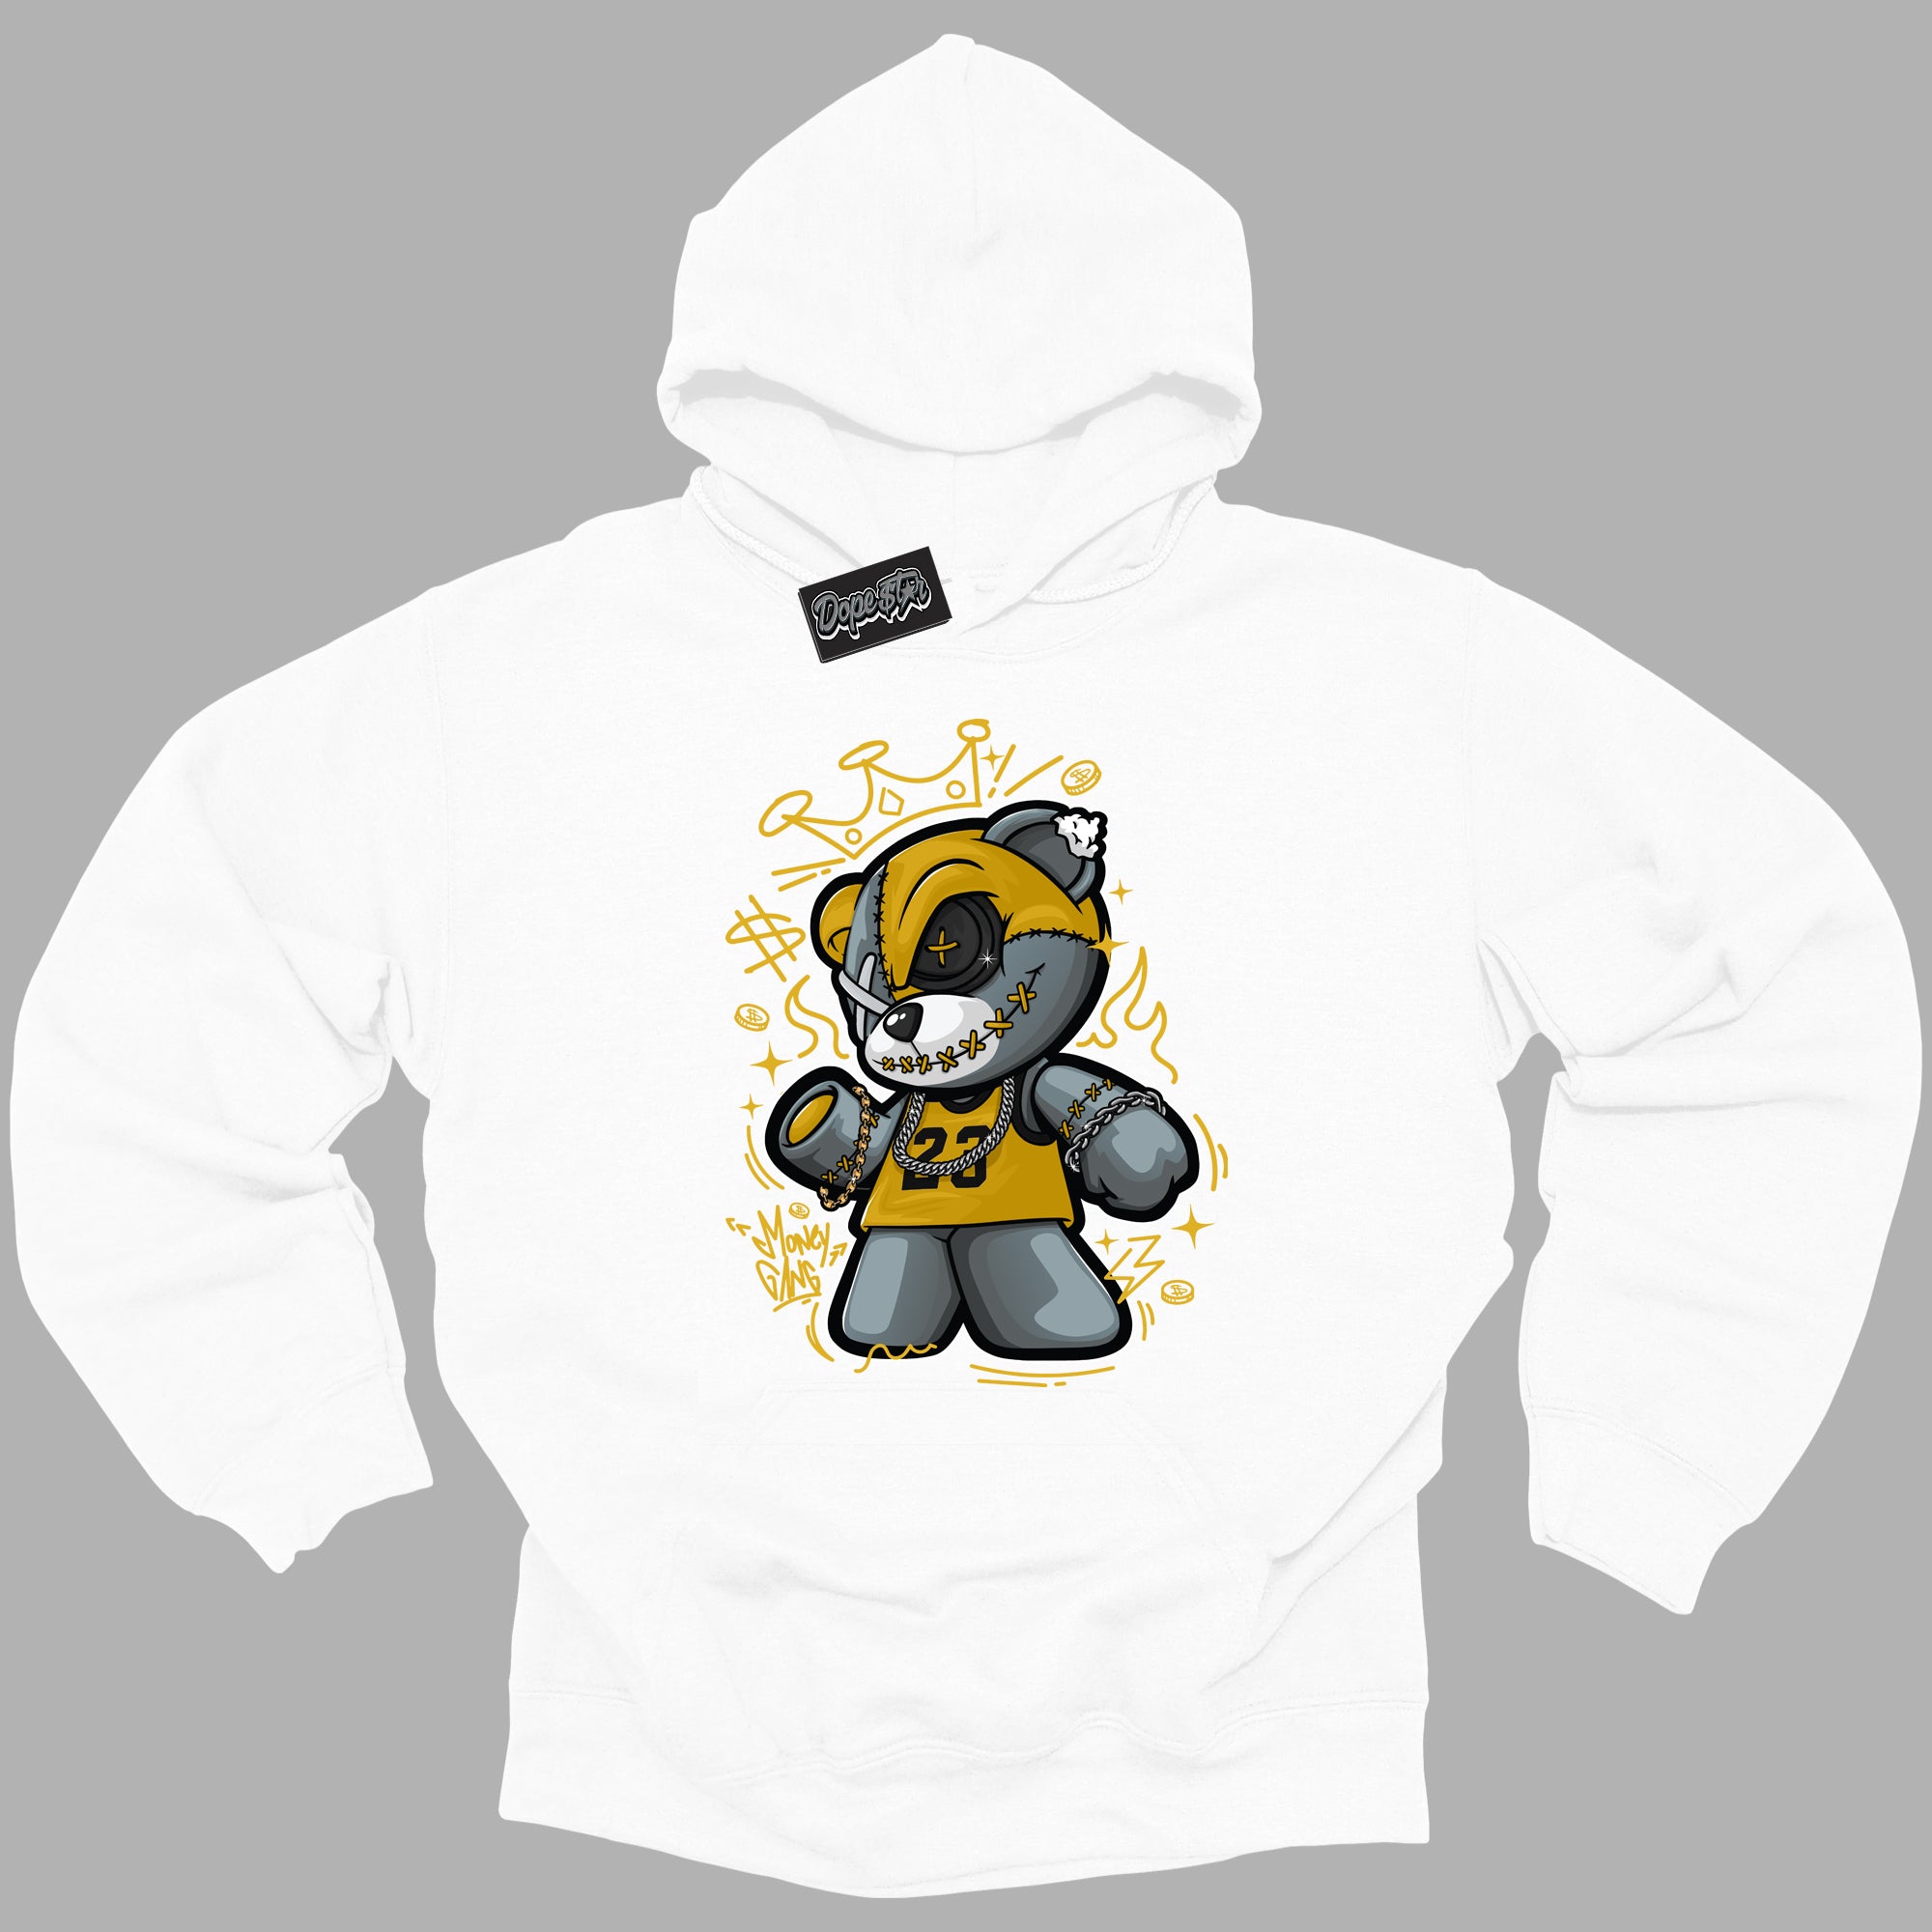 Cool White Hoodie with “ Money Gang Bear ”  design that Perfectly Matches Yellow Ochre 6s Sneakers.